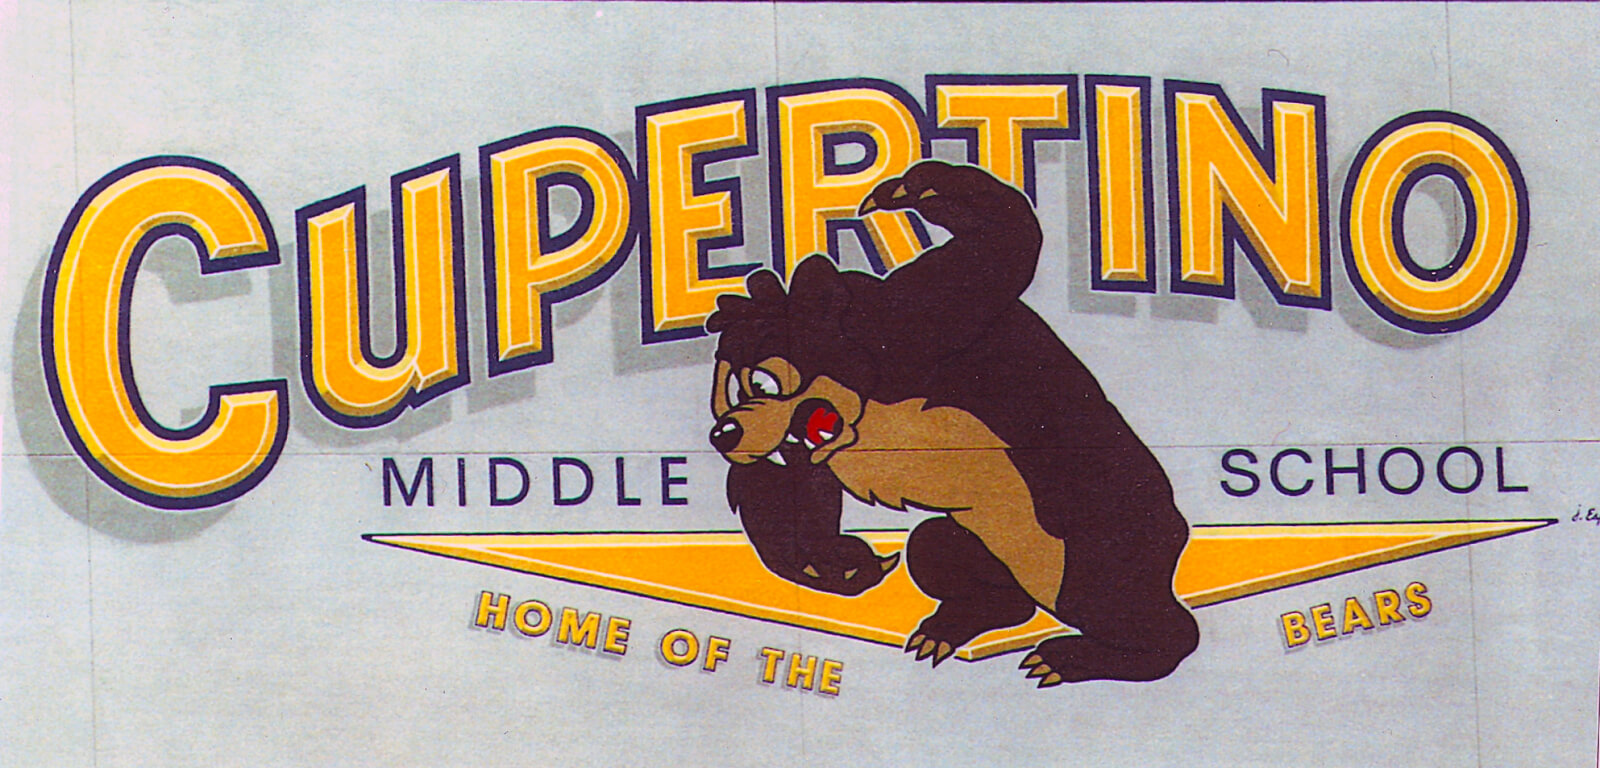 Cupertino school signs middle bears mascot wall